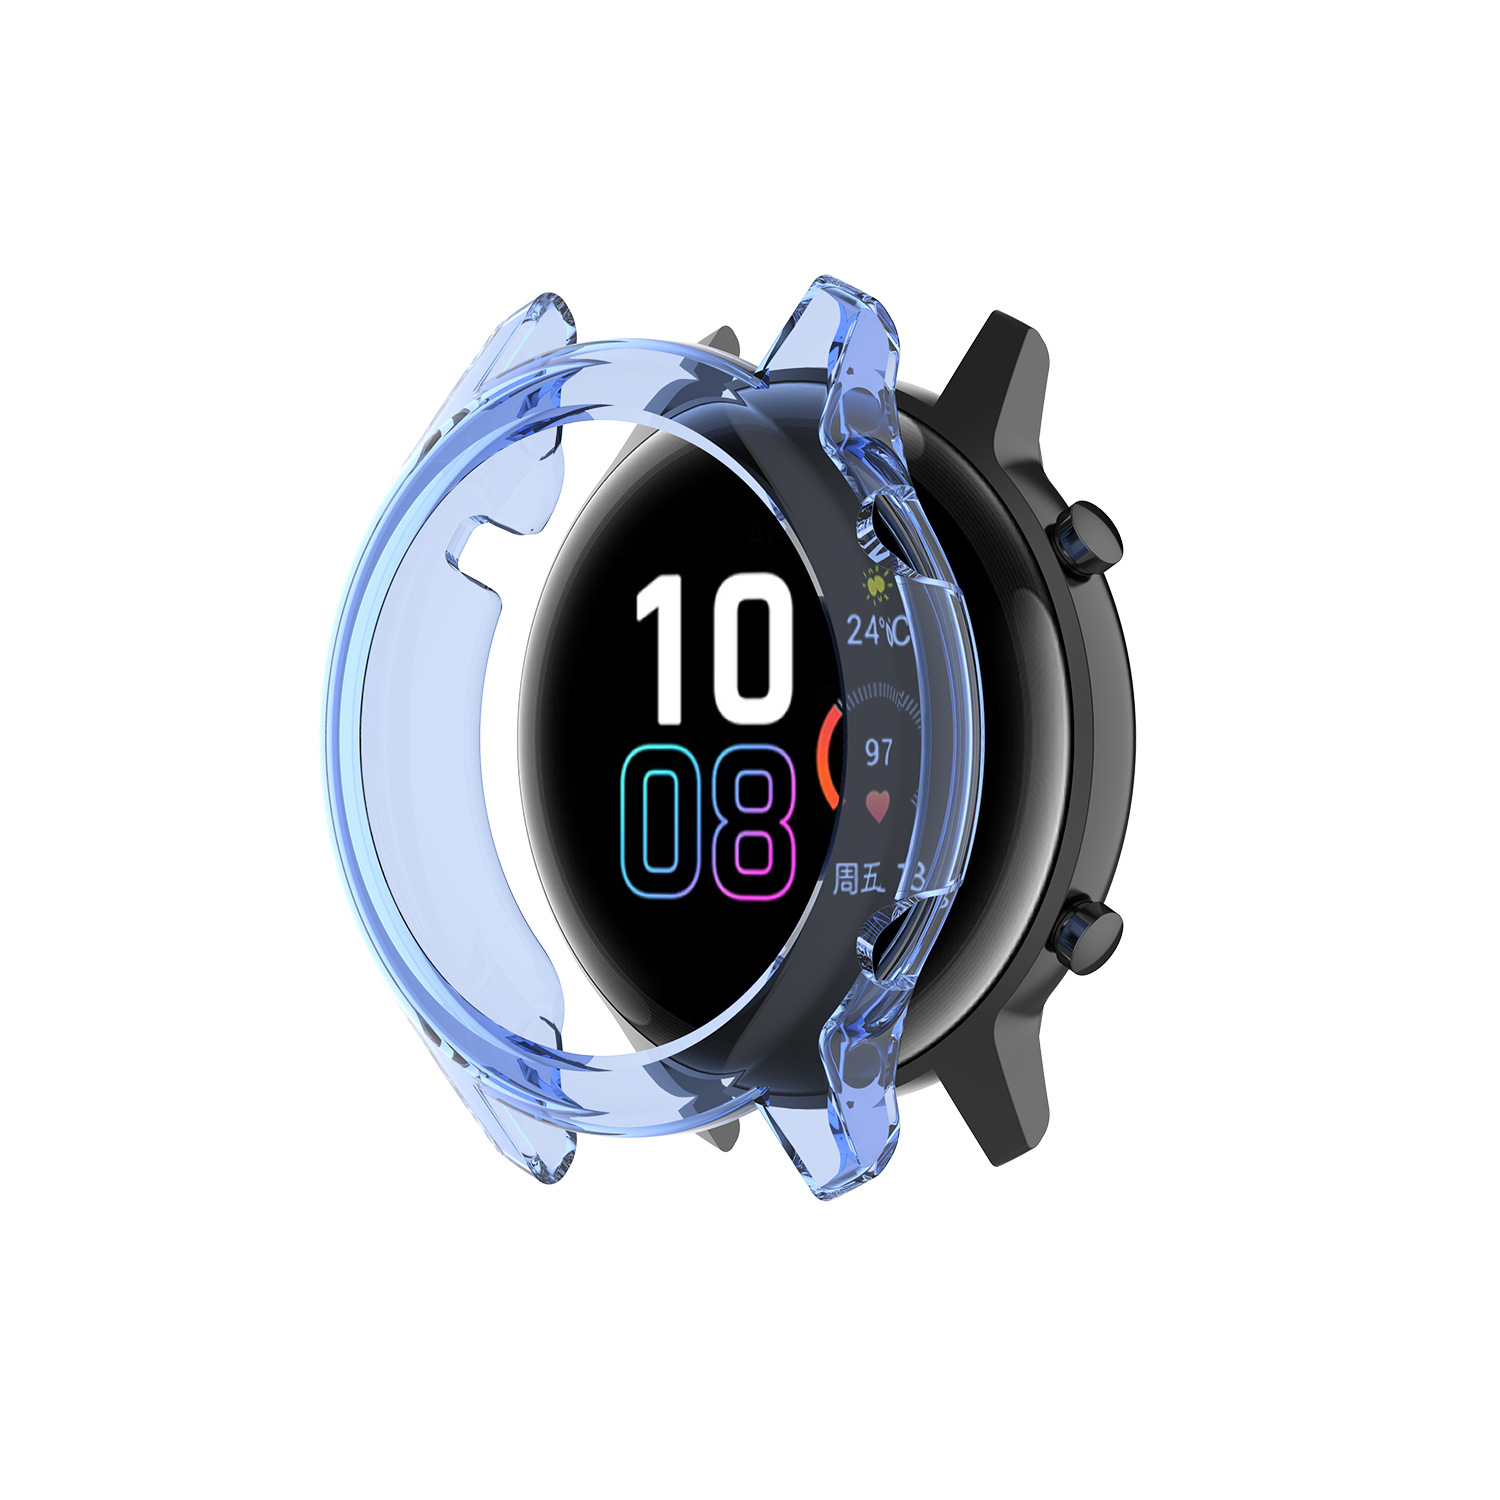 Find Bakeey TPU Half Cover Transparent Protector Case for Huawei Honor Magic Watch2 42mm/46mm for Sale on Gipsybee.com with cryptocurrencies